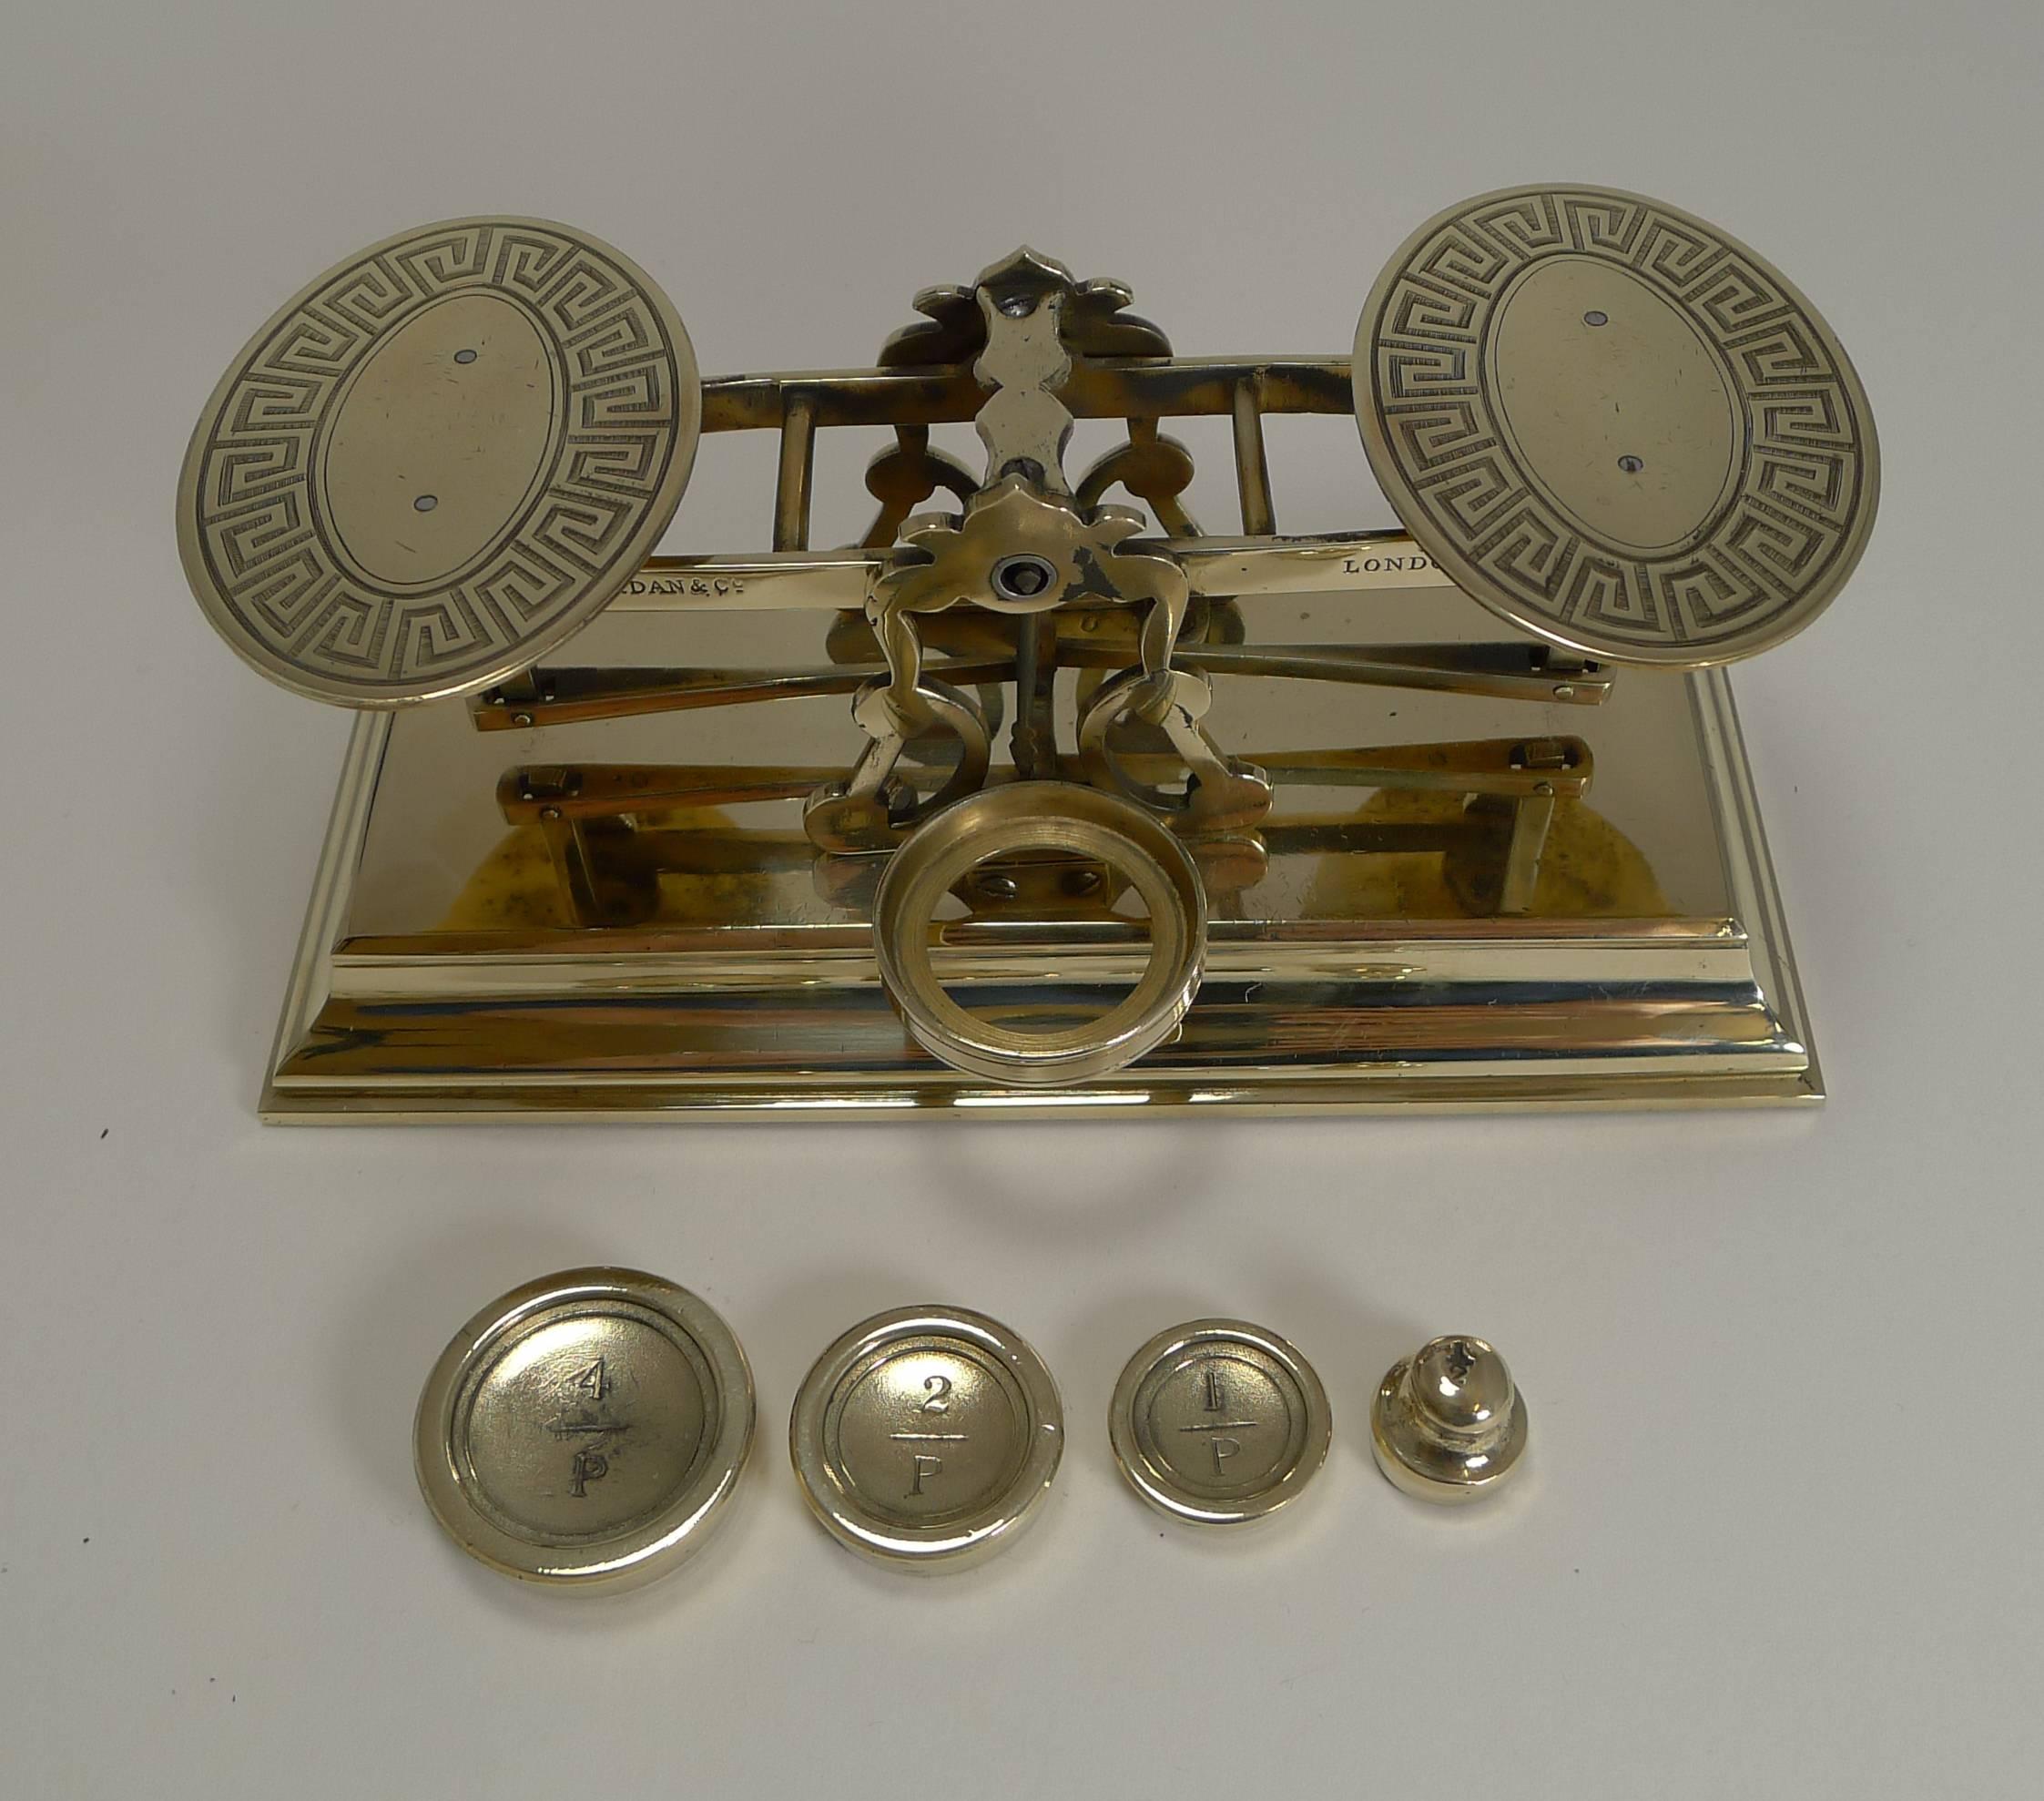 Late Victorian Antique English Postal/Letter Scales by Sampson Mordan, circa 1880